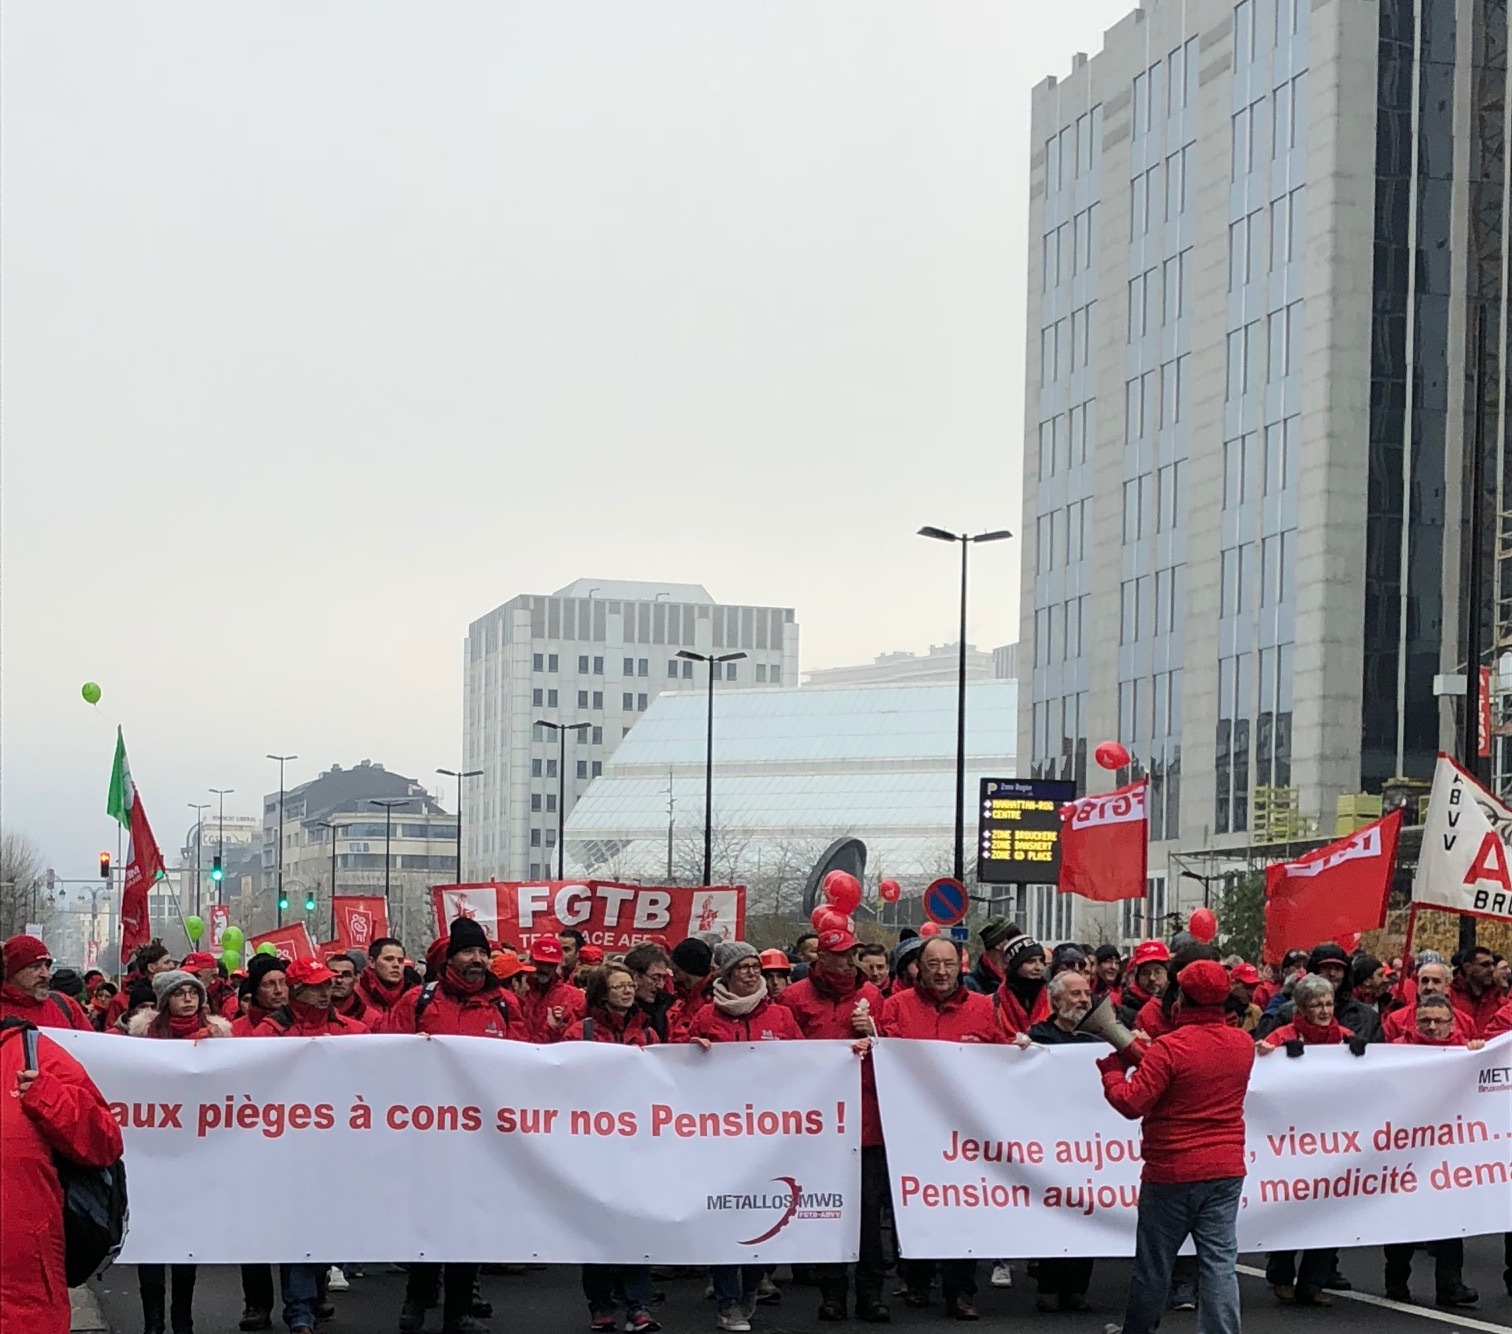 Huge demonstration in Brussels to protest against the government's pension reforms